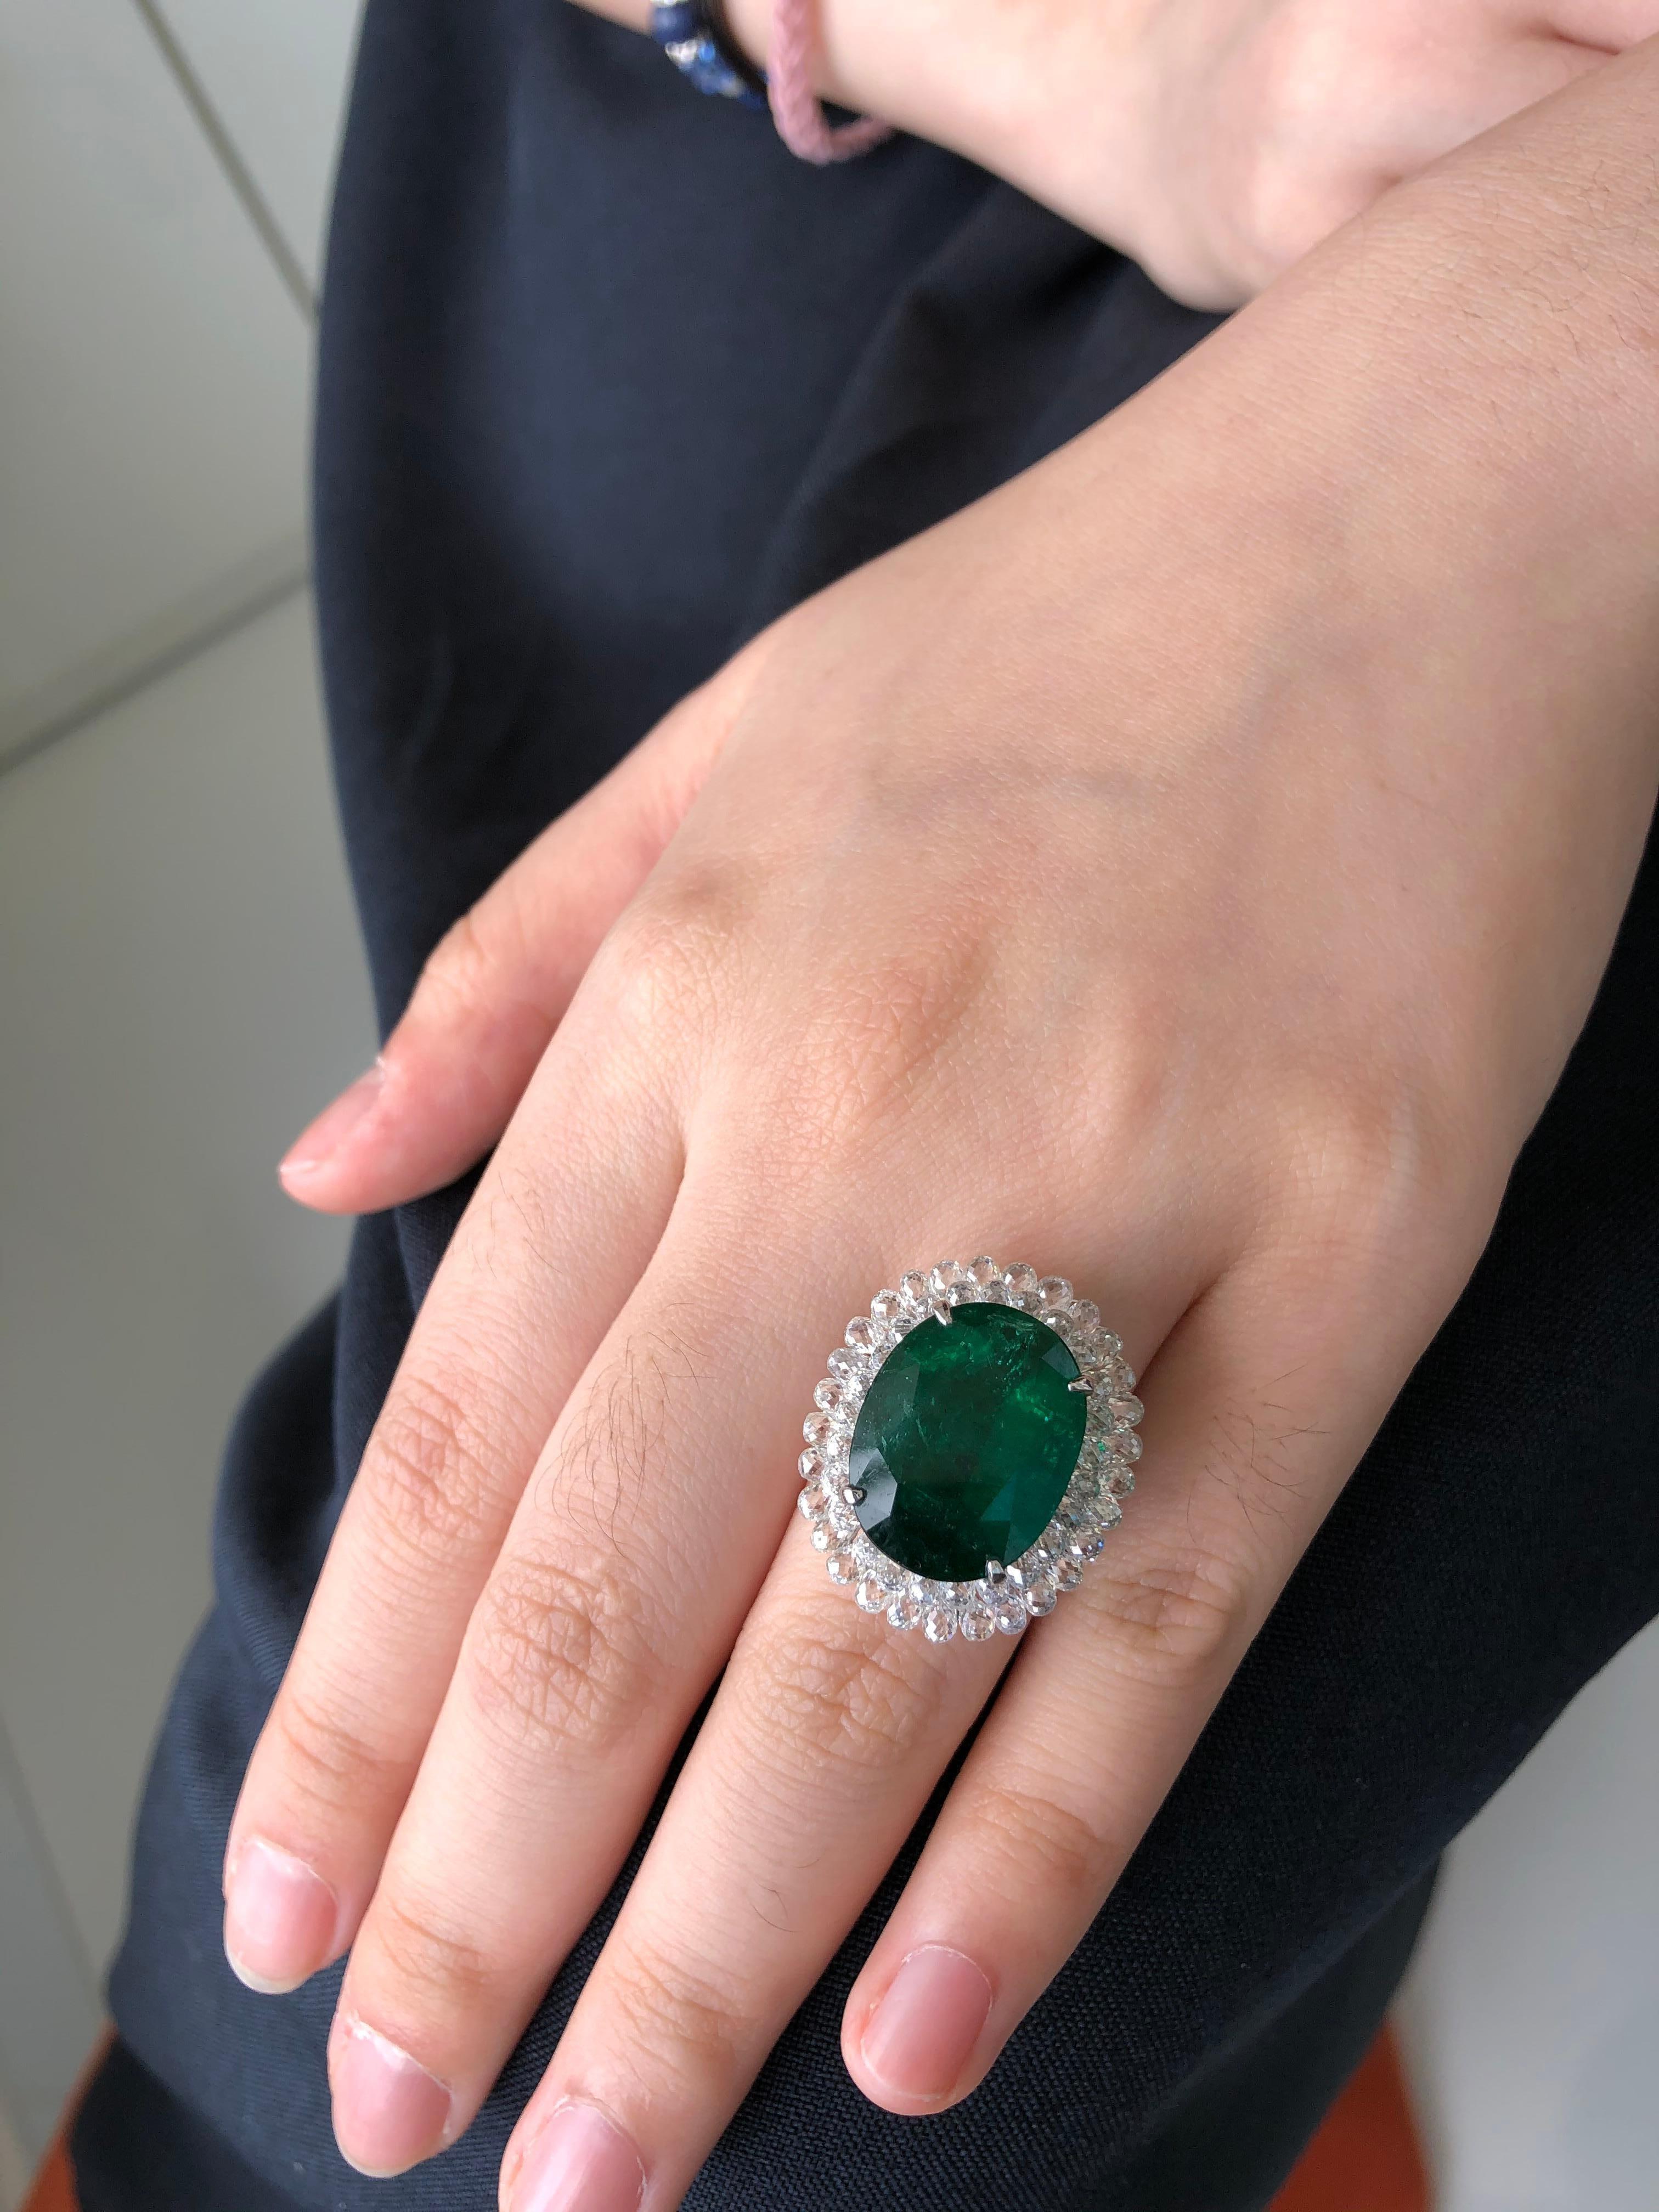 JR 18 Karat White Gold Invisible Diamond Briolette Emerald Ring

Classic combination of Emerald and white Ring Featuring 14.12 carats Oval Shape Zambian Emerald as the center piece and studded with 6.79 carats Invisible Setting of White Diamond